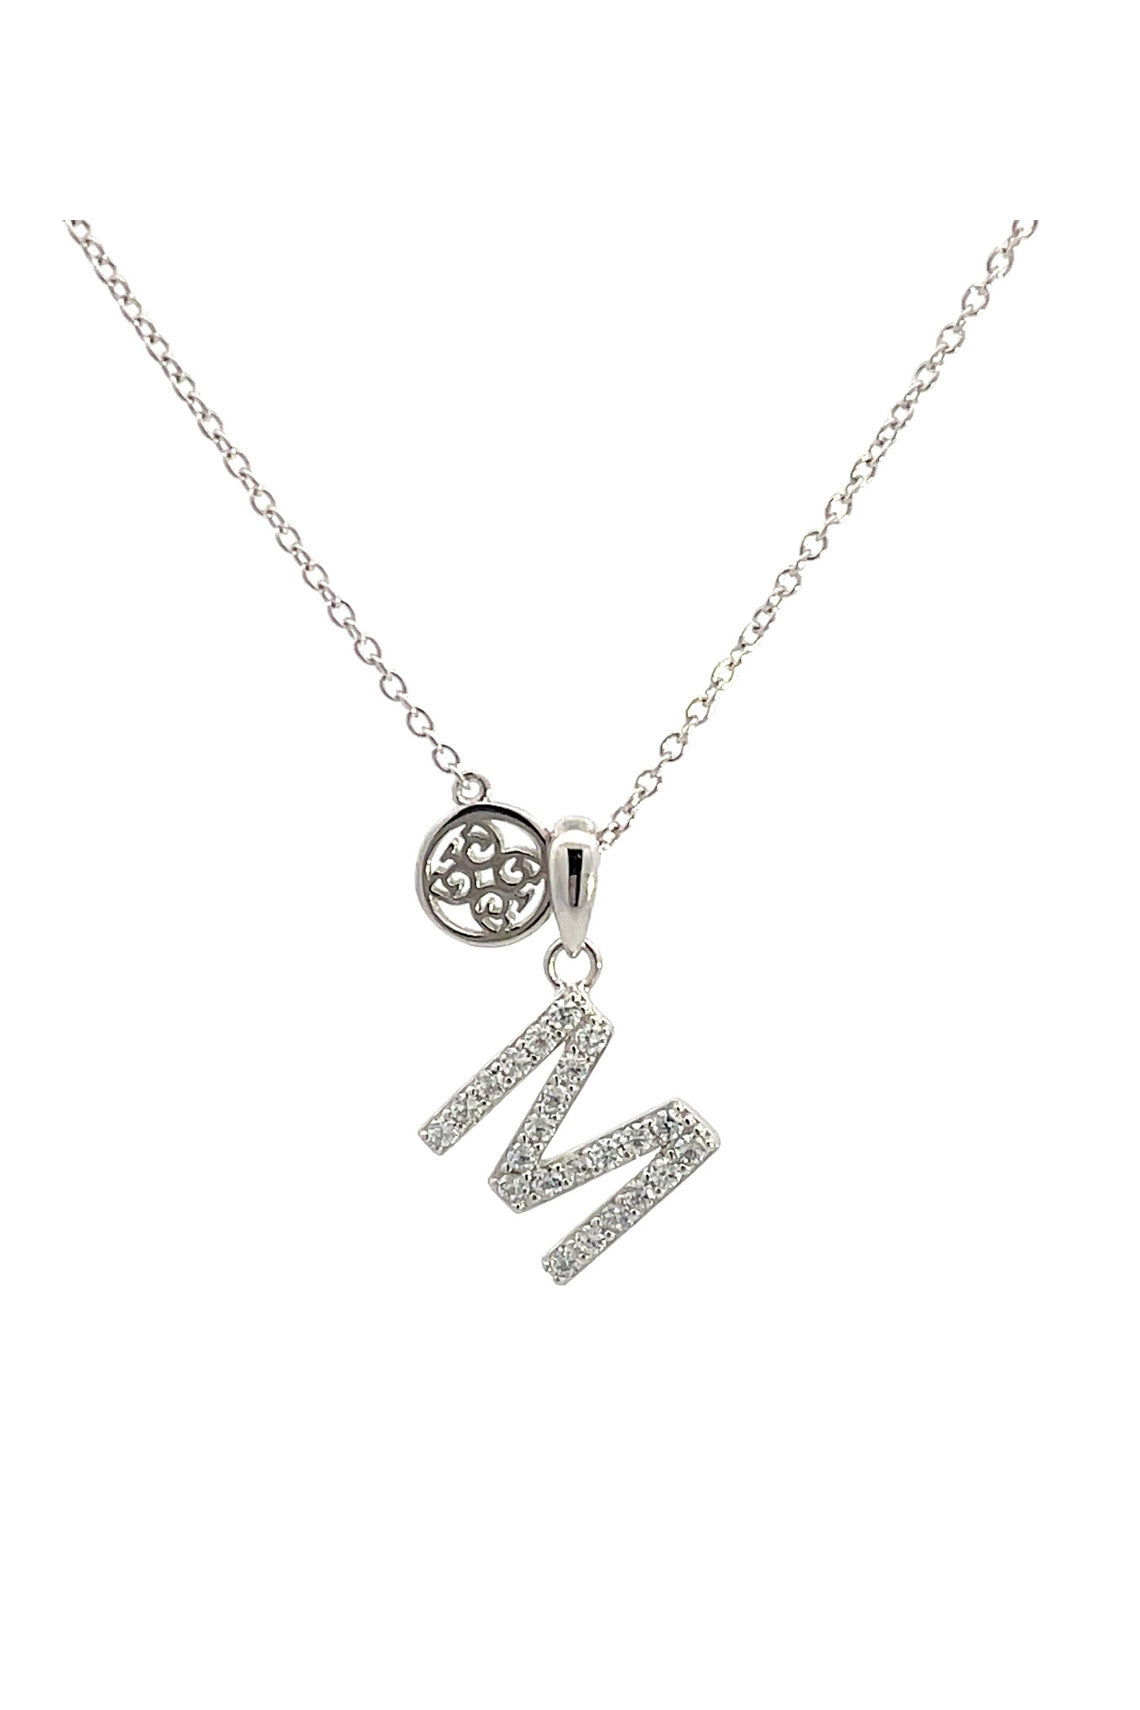 LUXURY LETTERS M INITIAL PENDANT SILVER